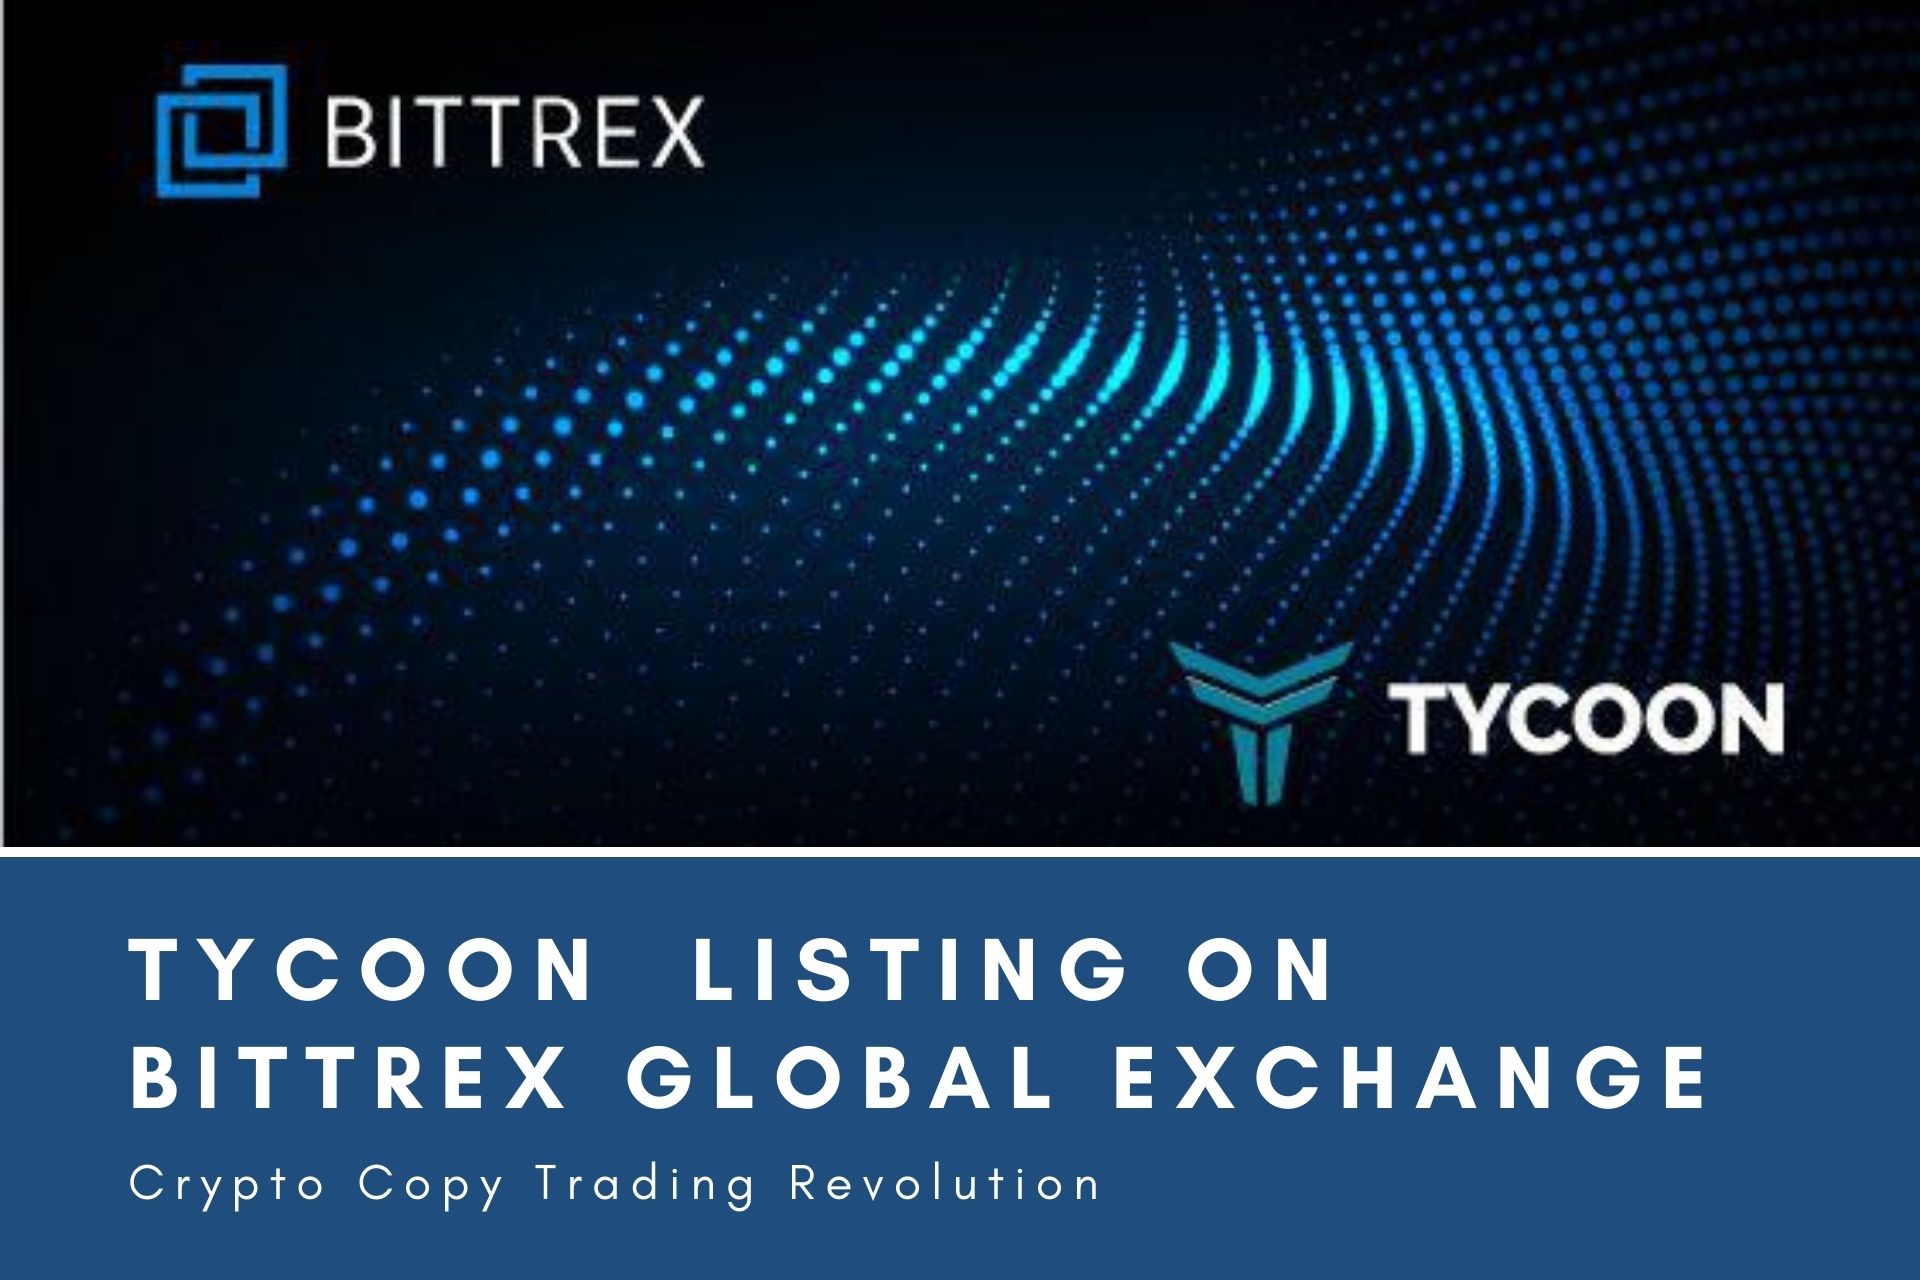 Tycoon, the Crypto Copy Trading Revolution. Now Listing on ...